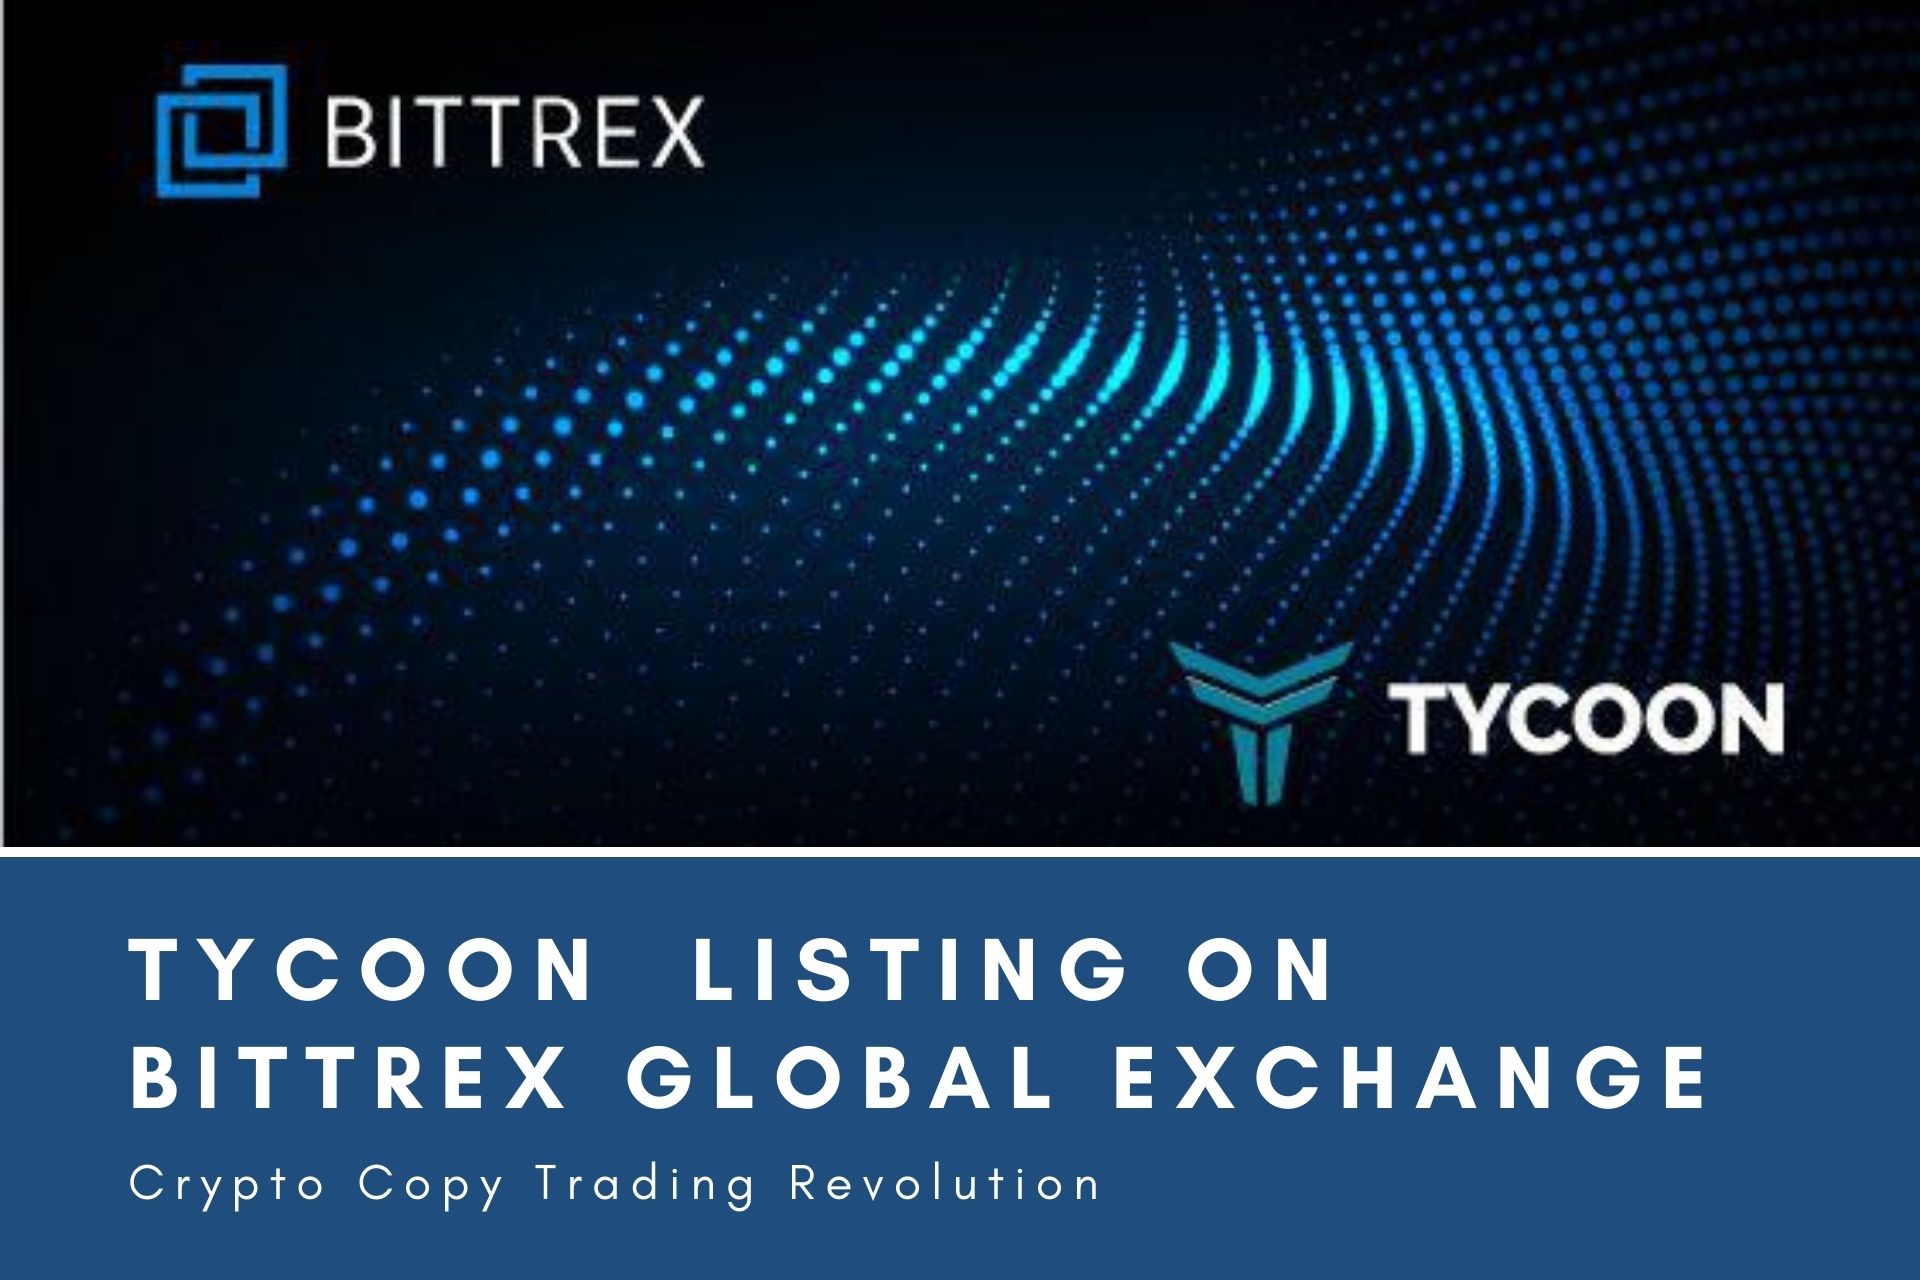 Tycoon, the Crypto Copy Trading Revolution. Now Listing on ...